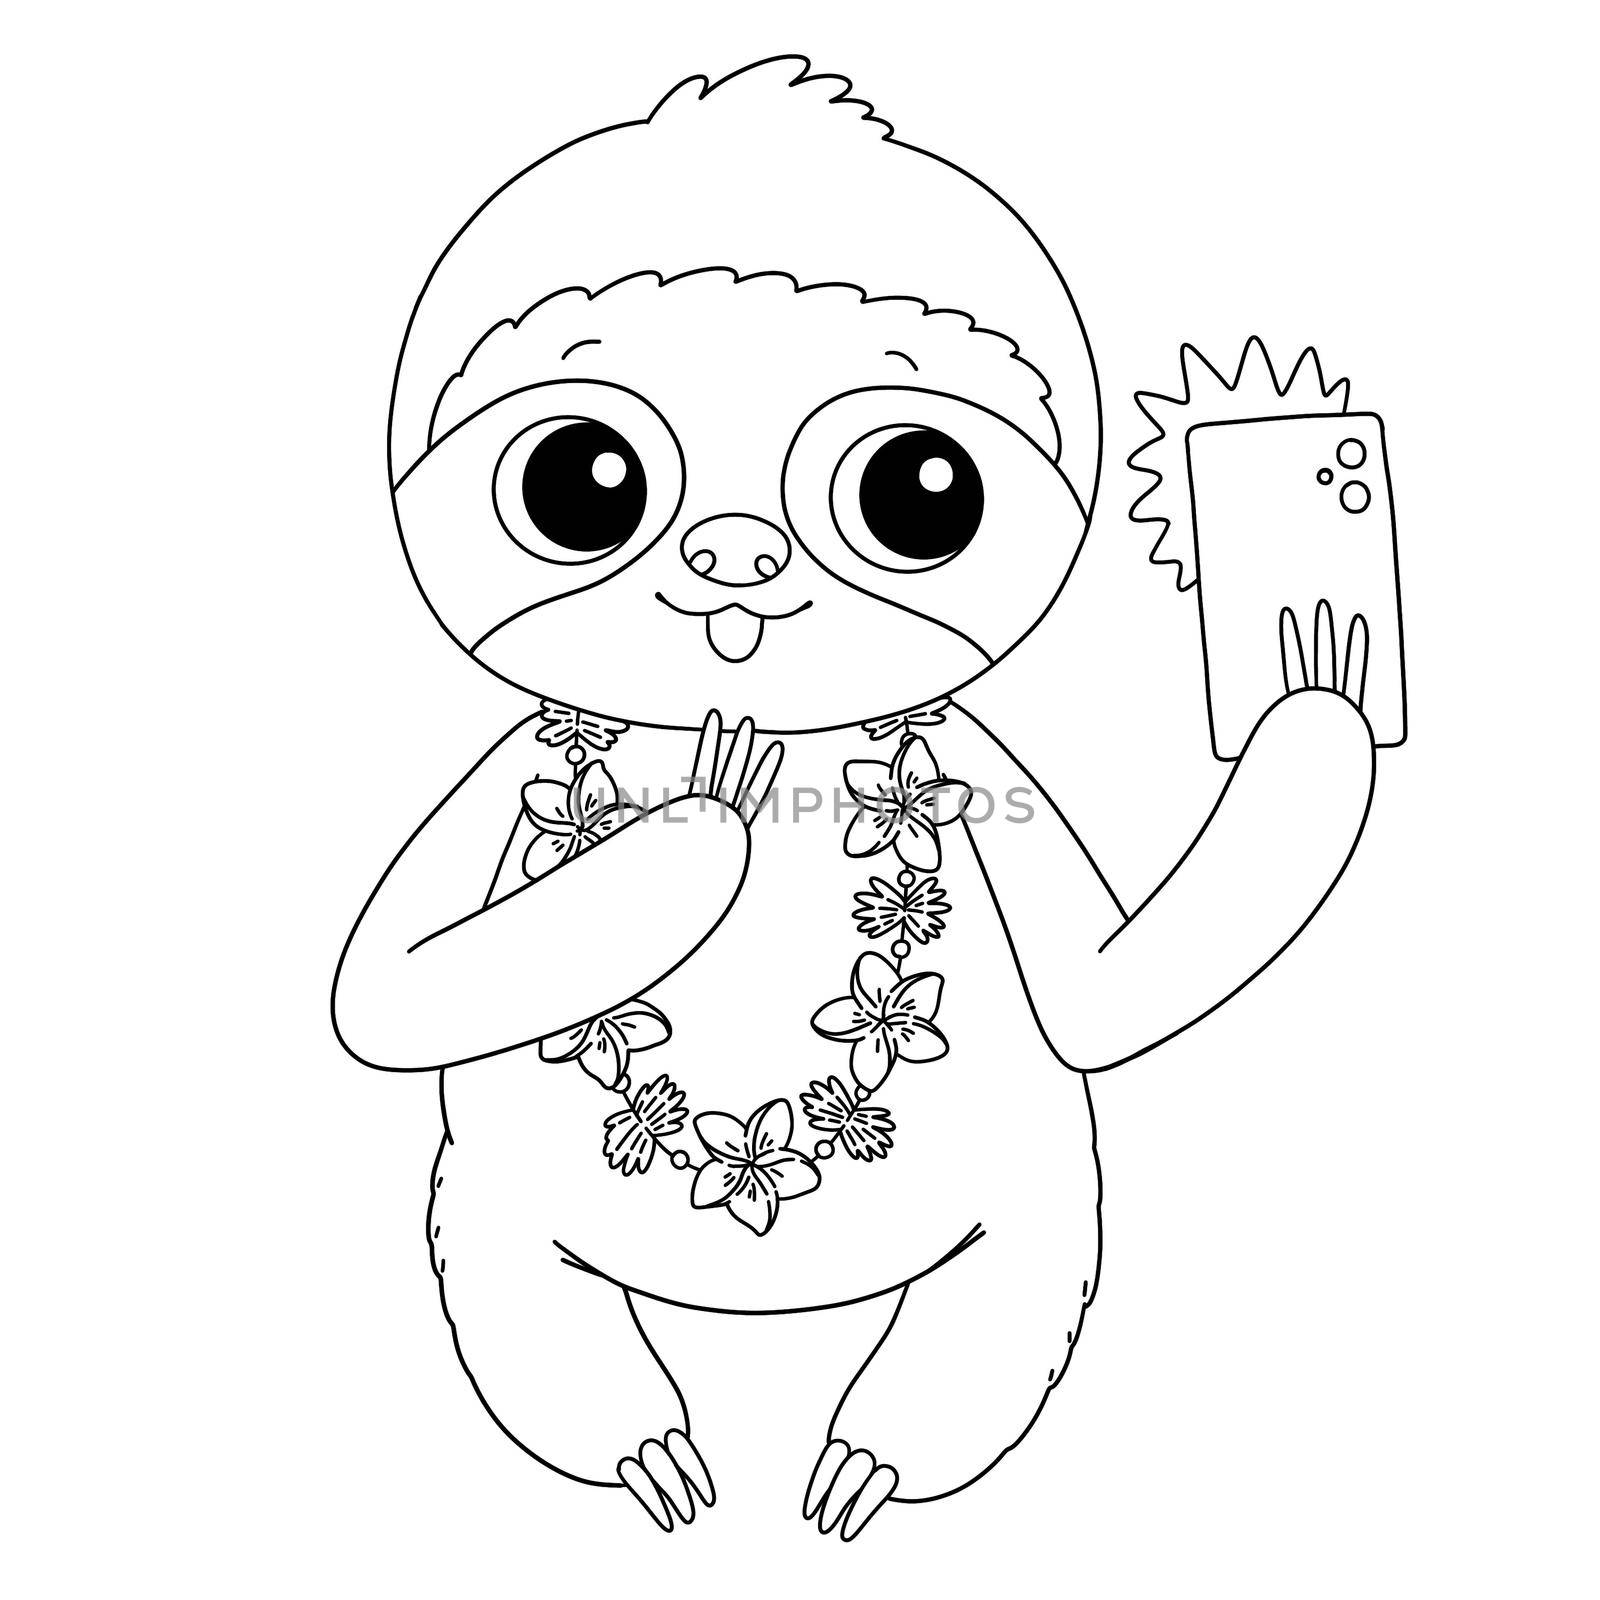 Cute sloth with hawaiian flowers and phone doing selfie summer coloring page illustration